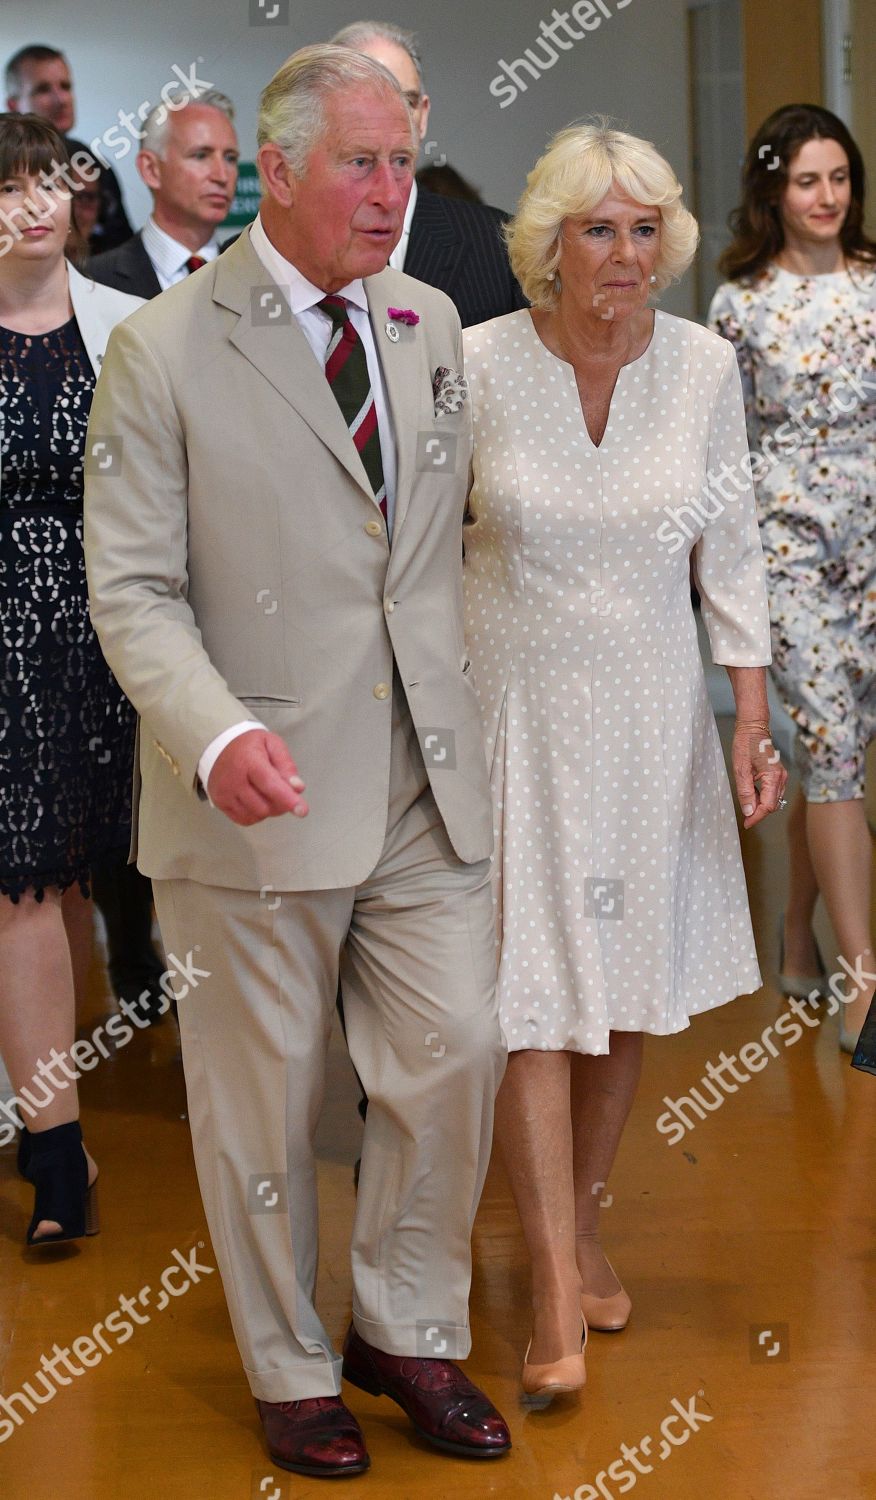 prince-charles-and-camilla-duchess-of-cornwall-visit-to-wales-uk-shutterstock-editorial-10327726bm.jpg